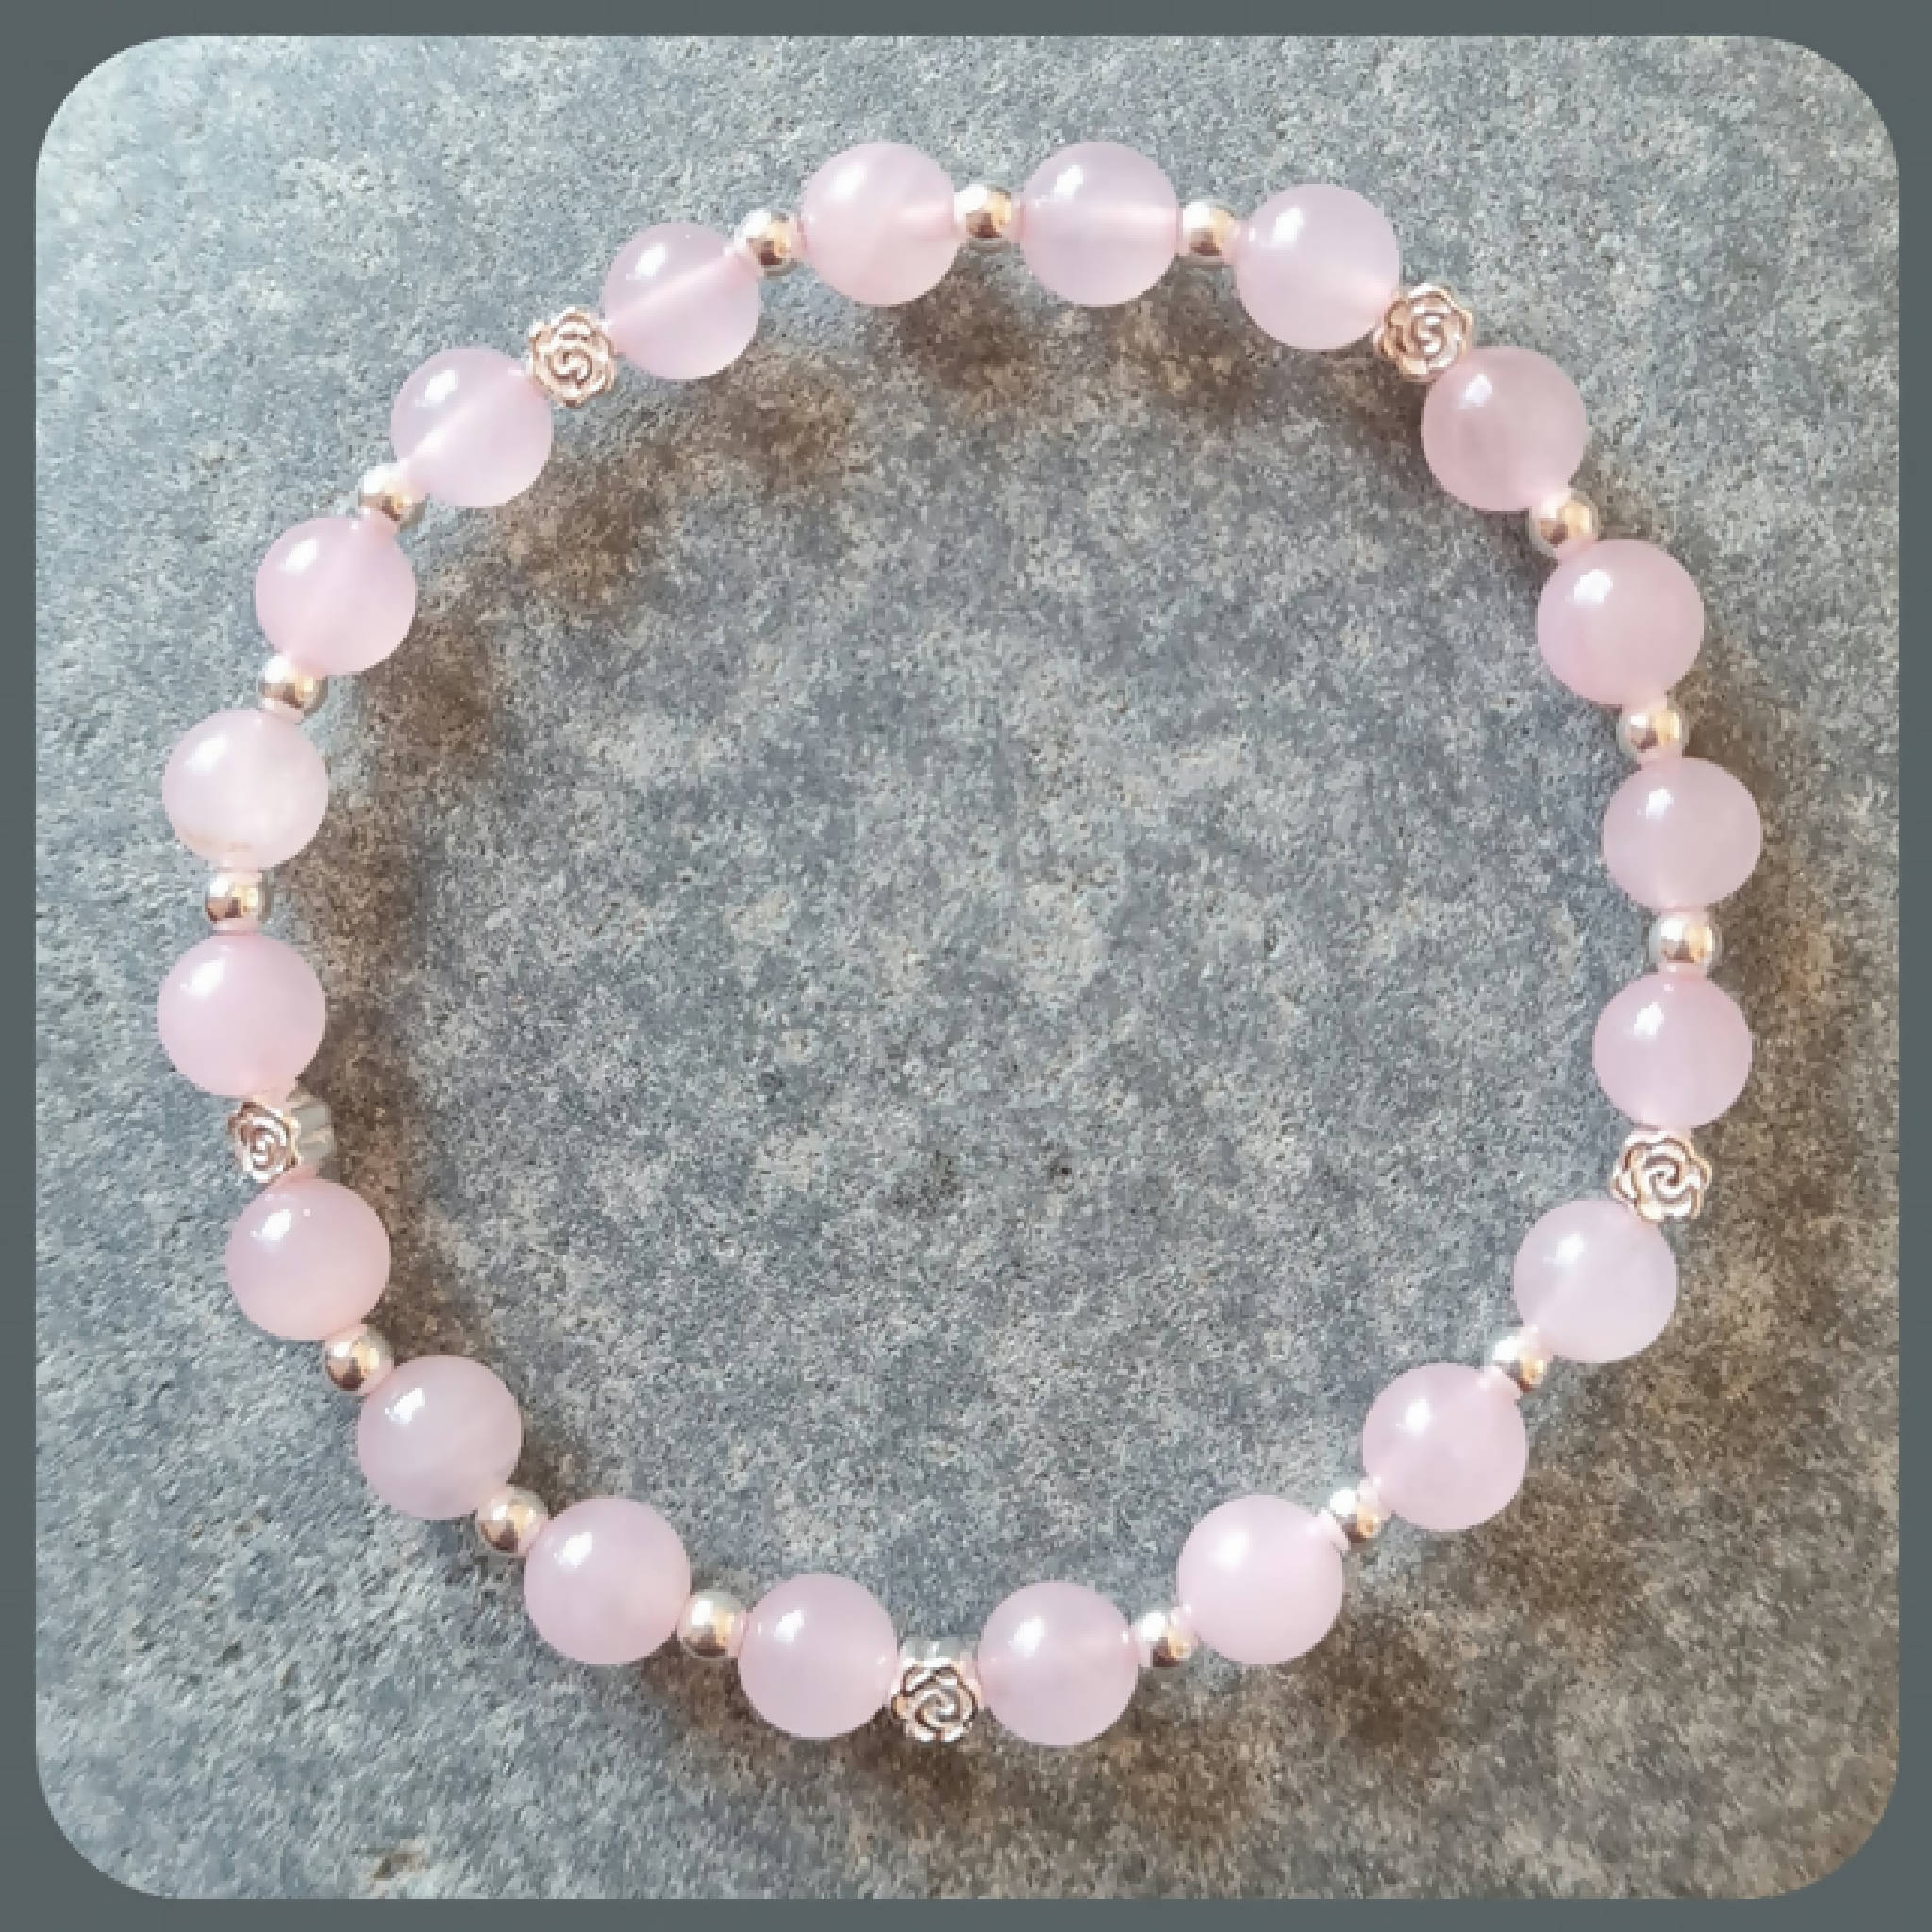 Rose Quartz and Sterling Silver Beaded Stacker Bracelet with Rose beads